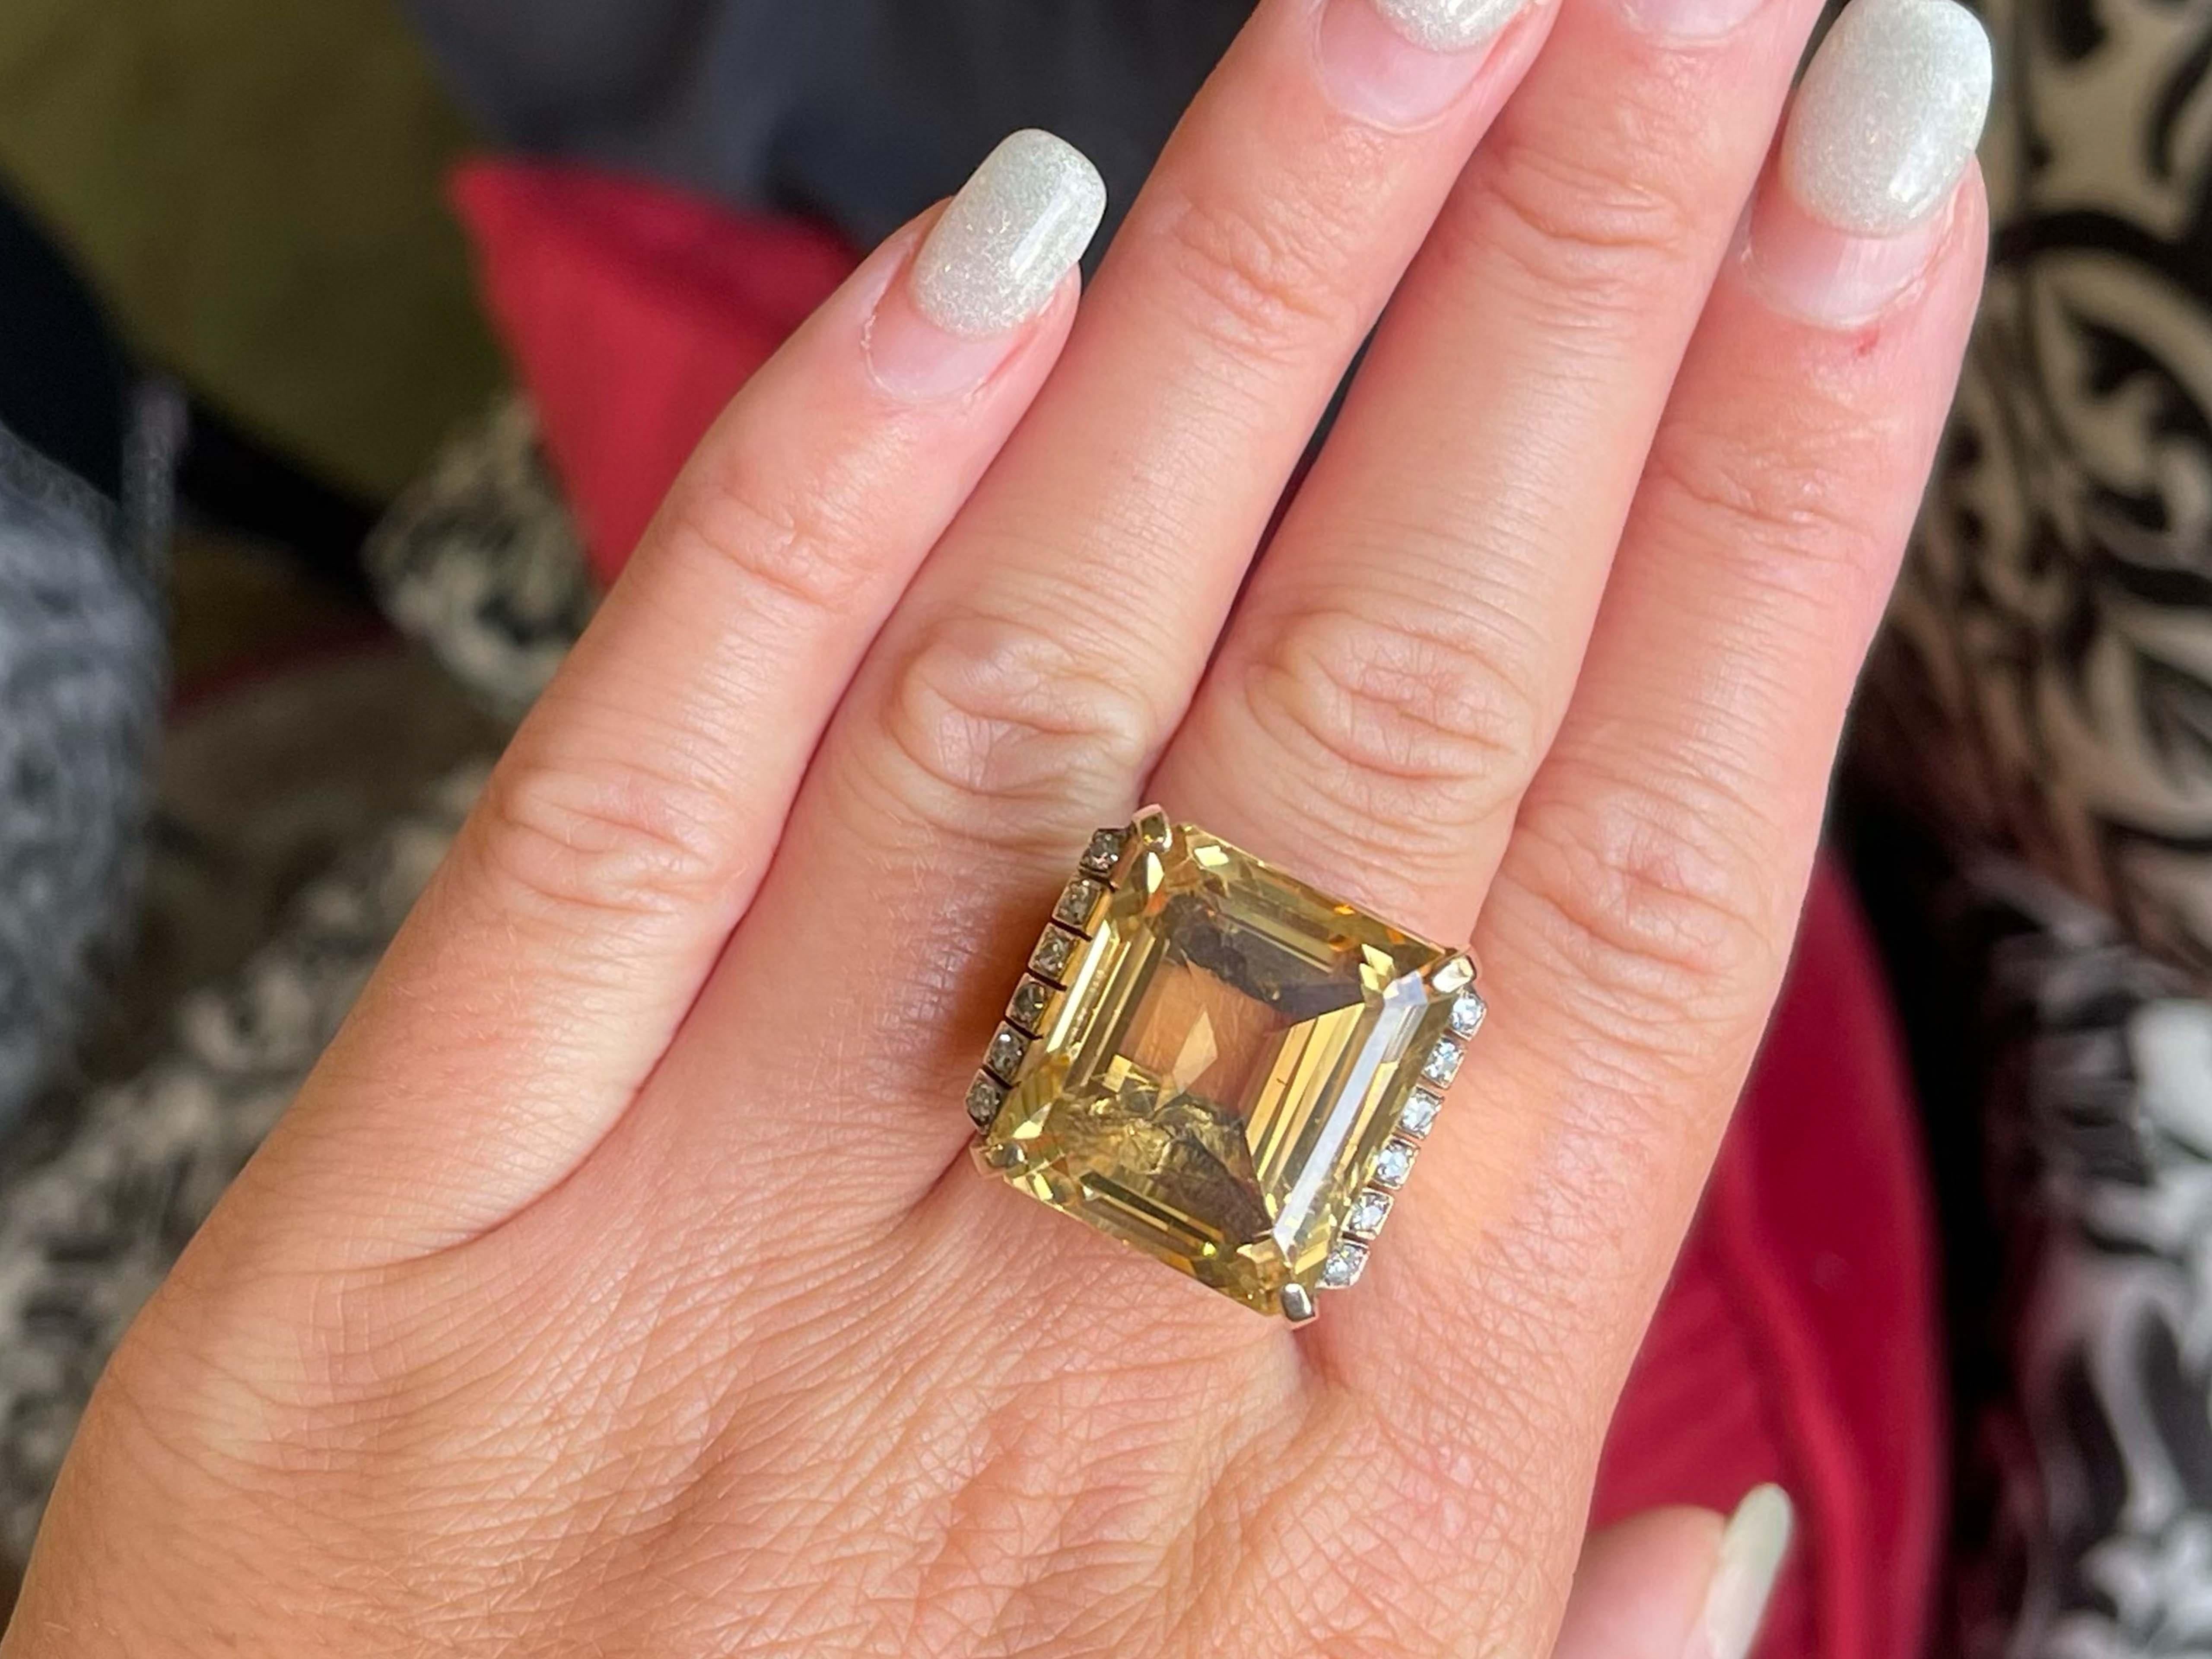 Item Specifications:

Metal: 14k Yellow Gold

​Ring Size: 7

Ring Weight: 23.0 grams

Gemstone Specifications:

Gemstone: Yellow Topaz

Topaz Measurements: 20.14 mm x 17.03 mm x 14.34

Topaz Carat Weight: ~43.50 Carats

Color: Yellow Brown

Shape: